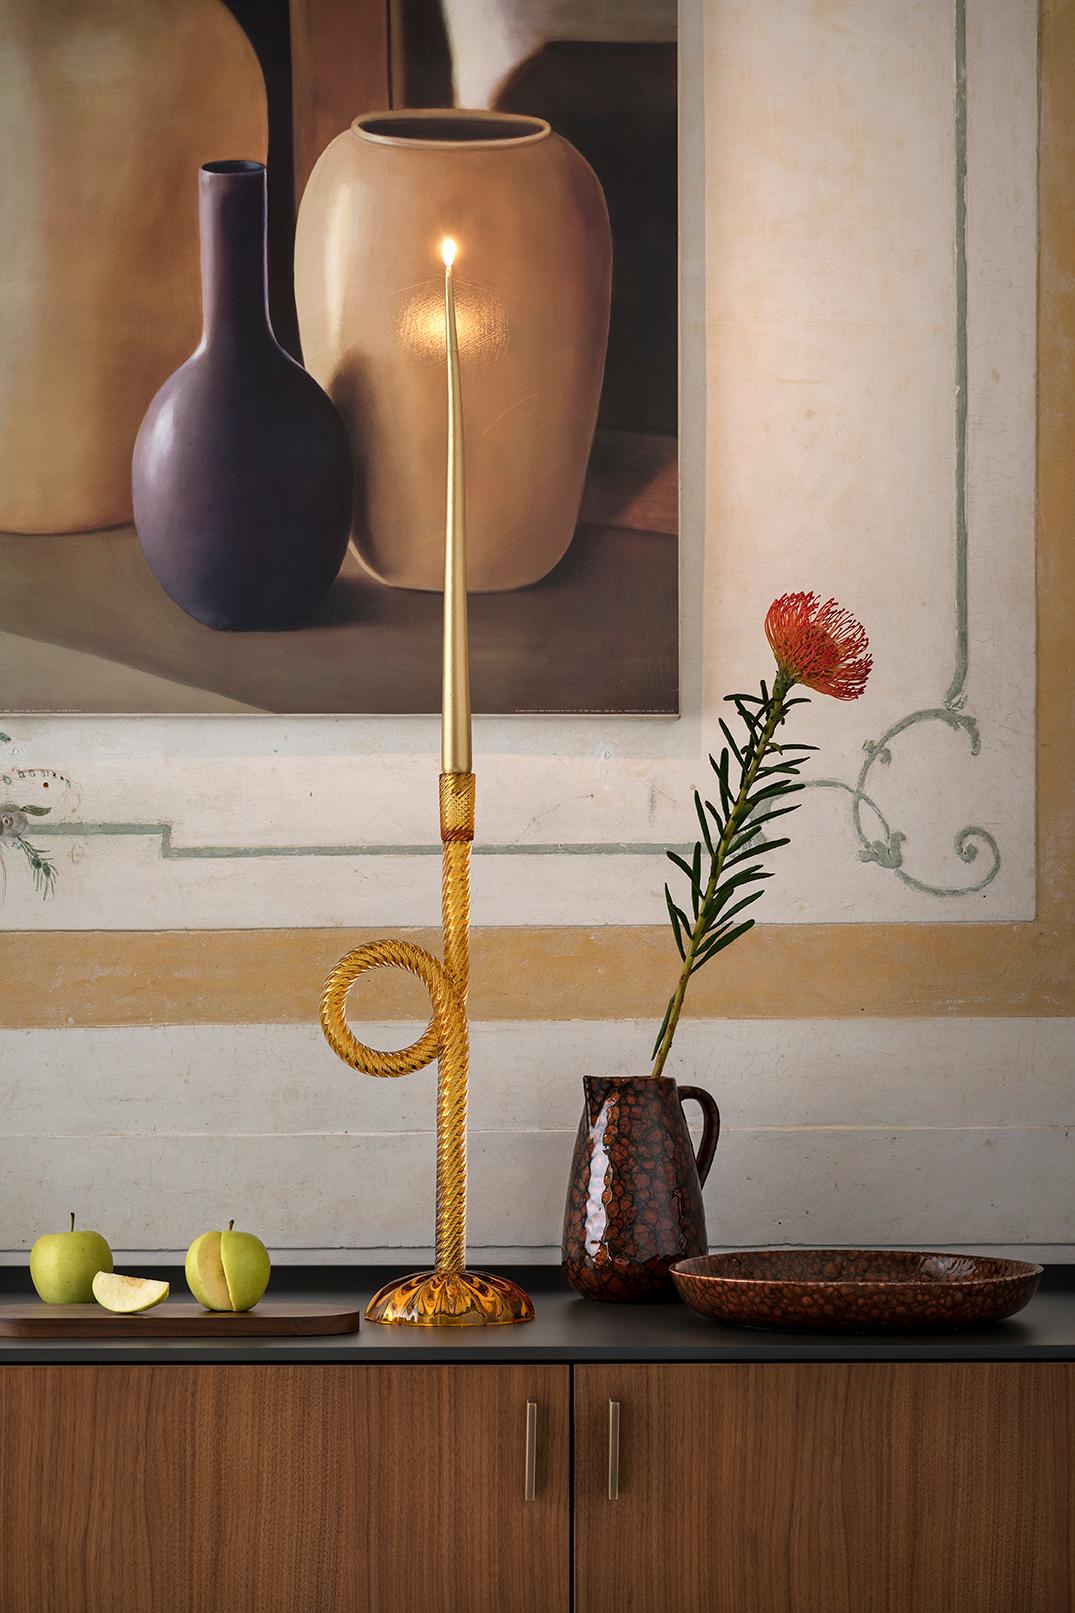 Aina Kari pays tribute to the Venetian Lagoon city. The Knots and ropes are part of Venetian everyday life, this original and contemporary candlestick holder highlights the expertise to twist the blown glass at 360 degrees.